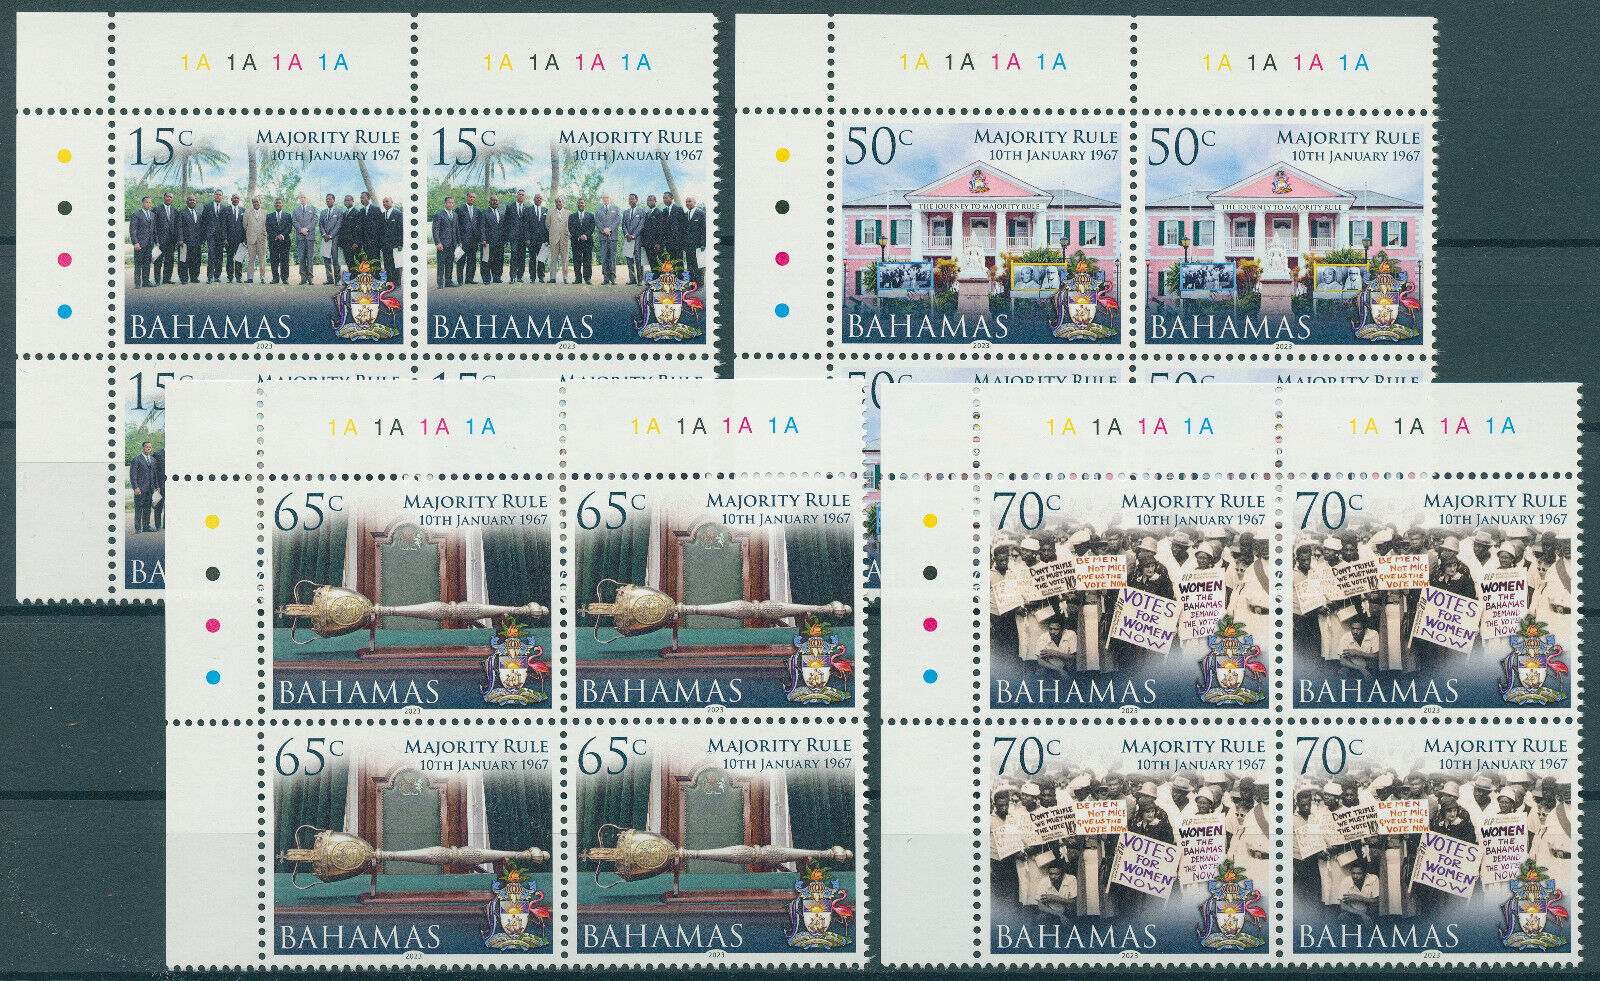 Bahamas 2022 MNH Historical Events Stamps Majority Rule 4v Set in Block 1A